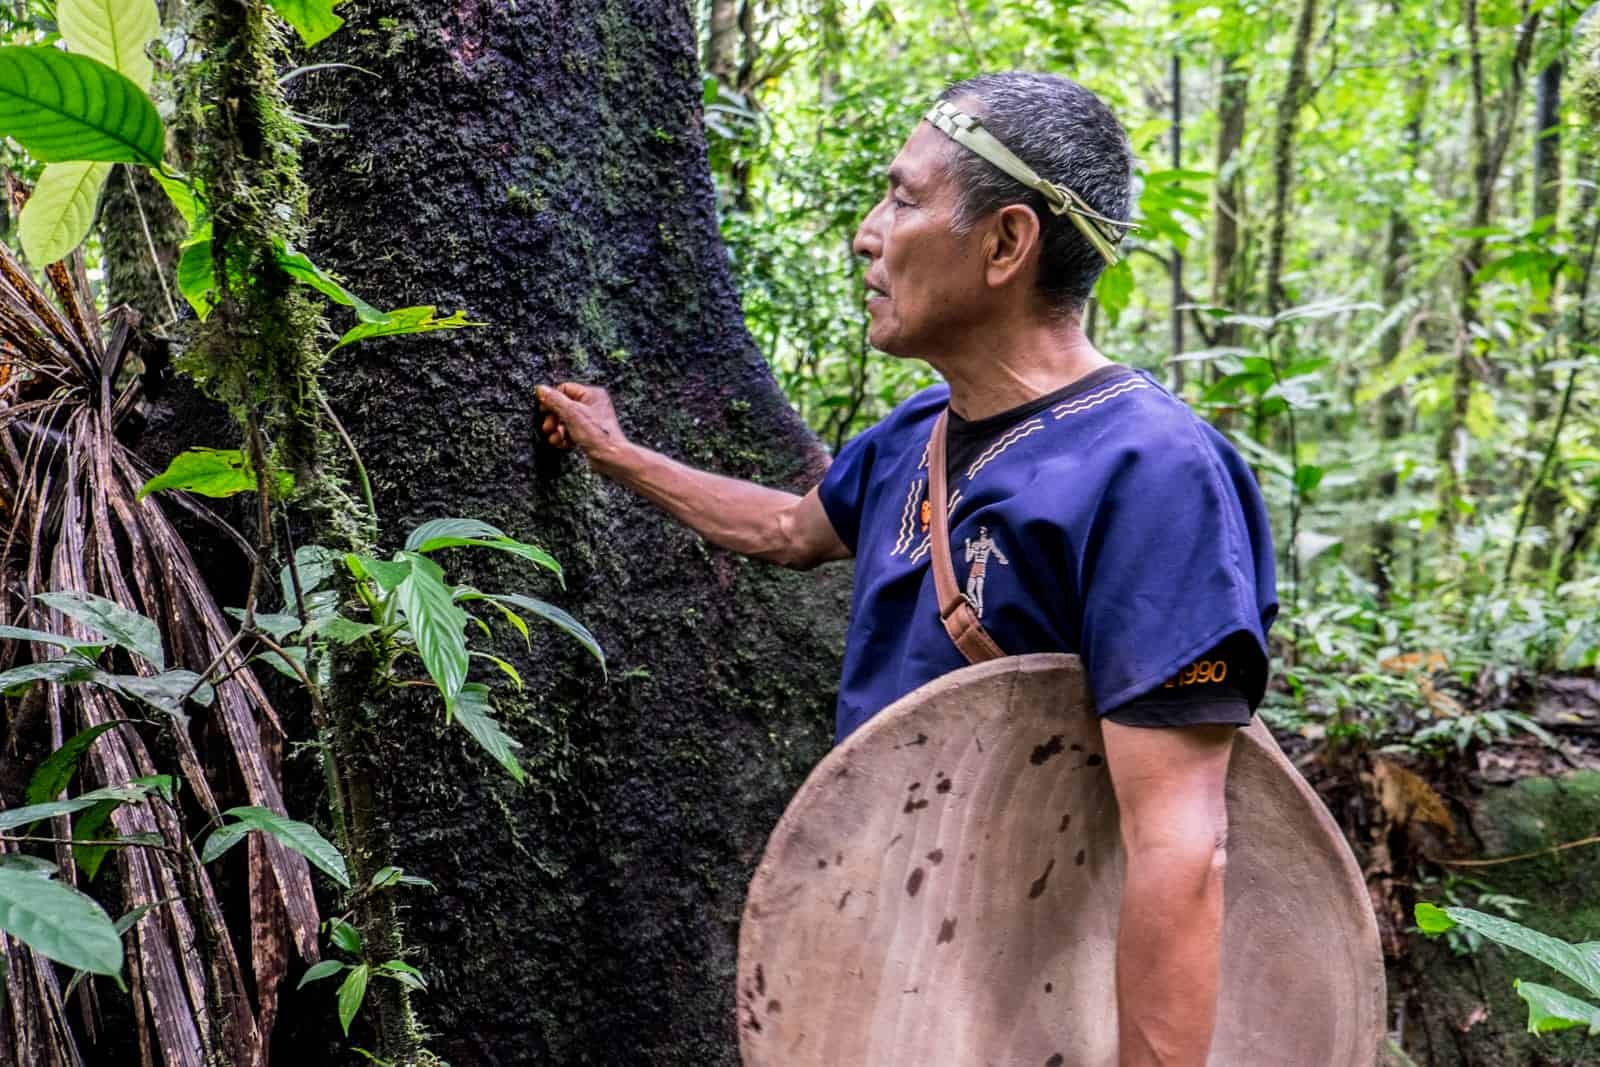 A man in a blue shirt and wearing a headband made from plants, carries a large wooden bowl while touching a tree, during a jungle walk in the Ecuadorian Amazon Rainforest. 